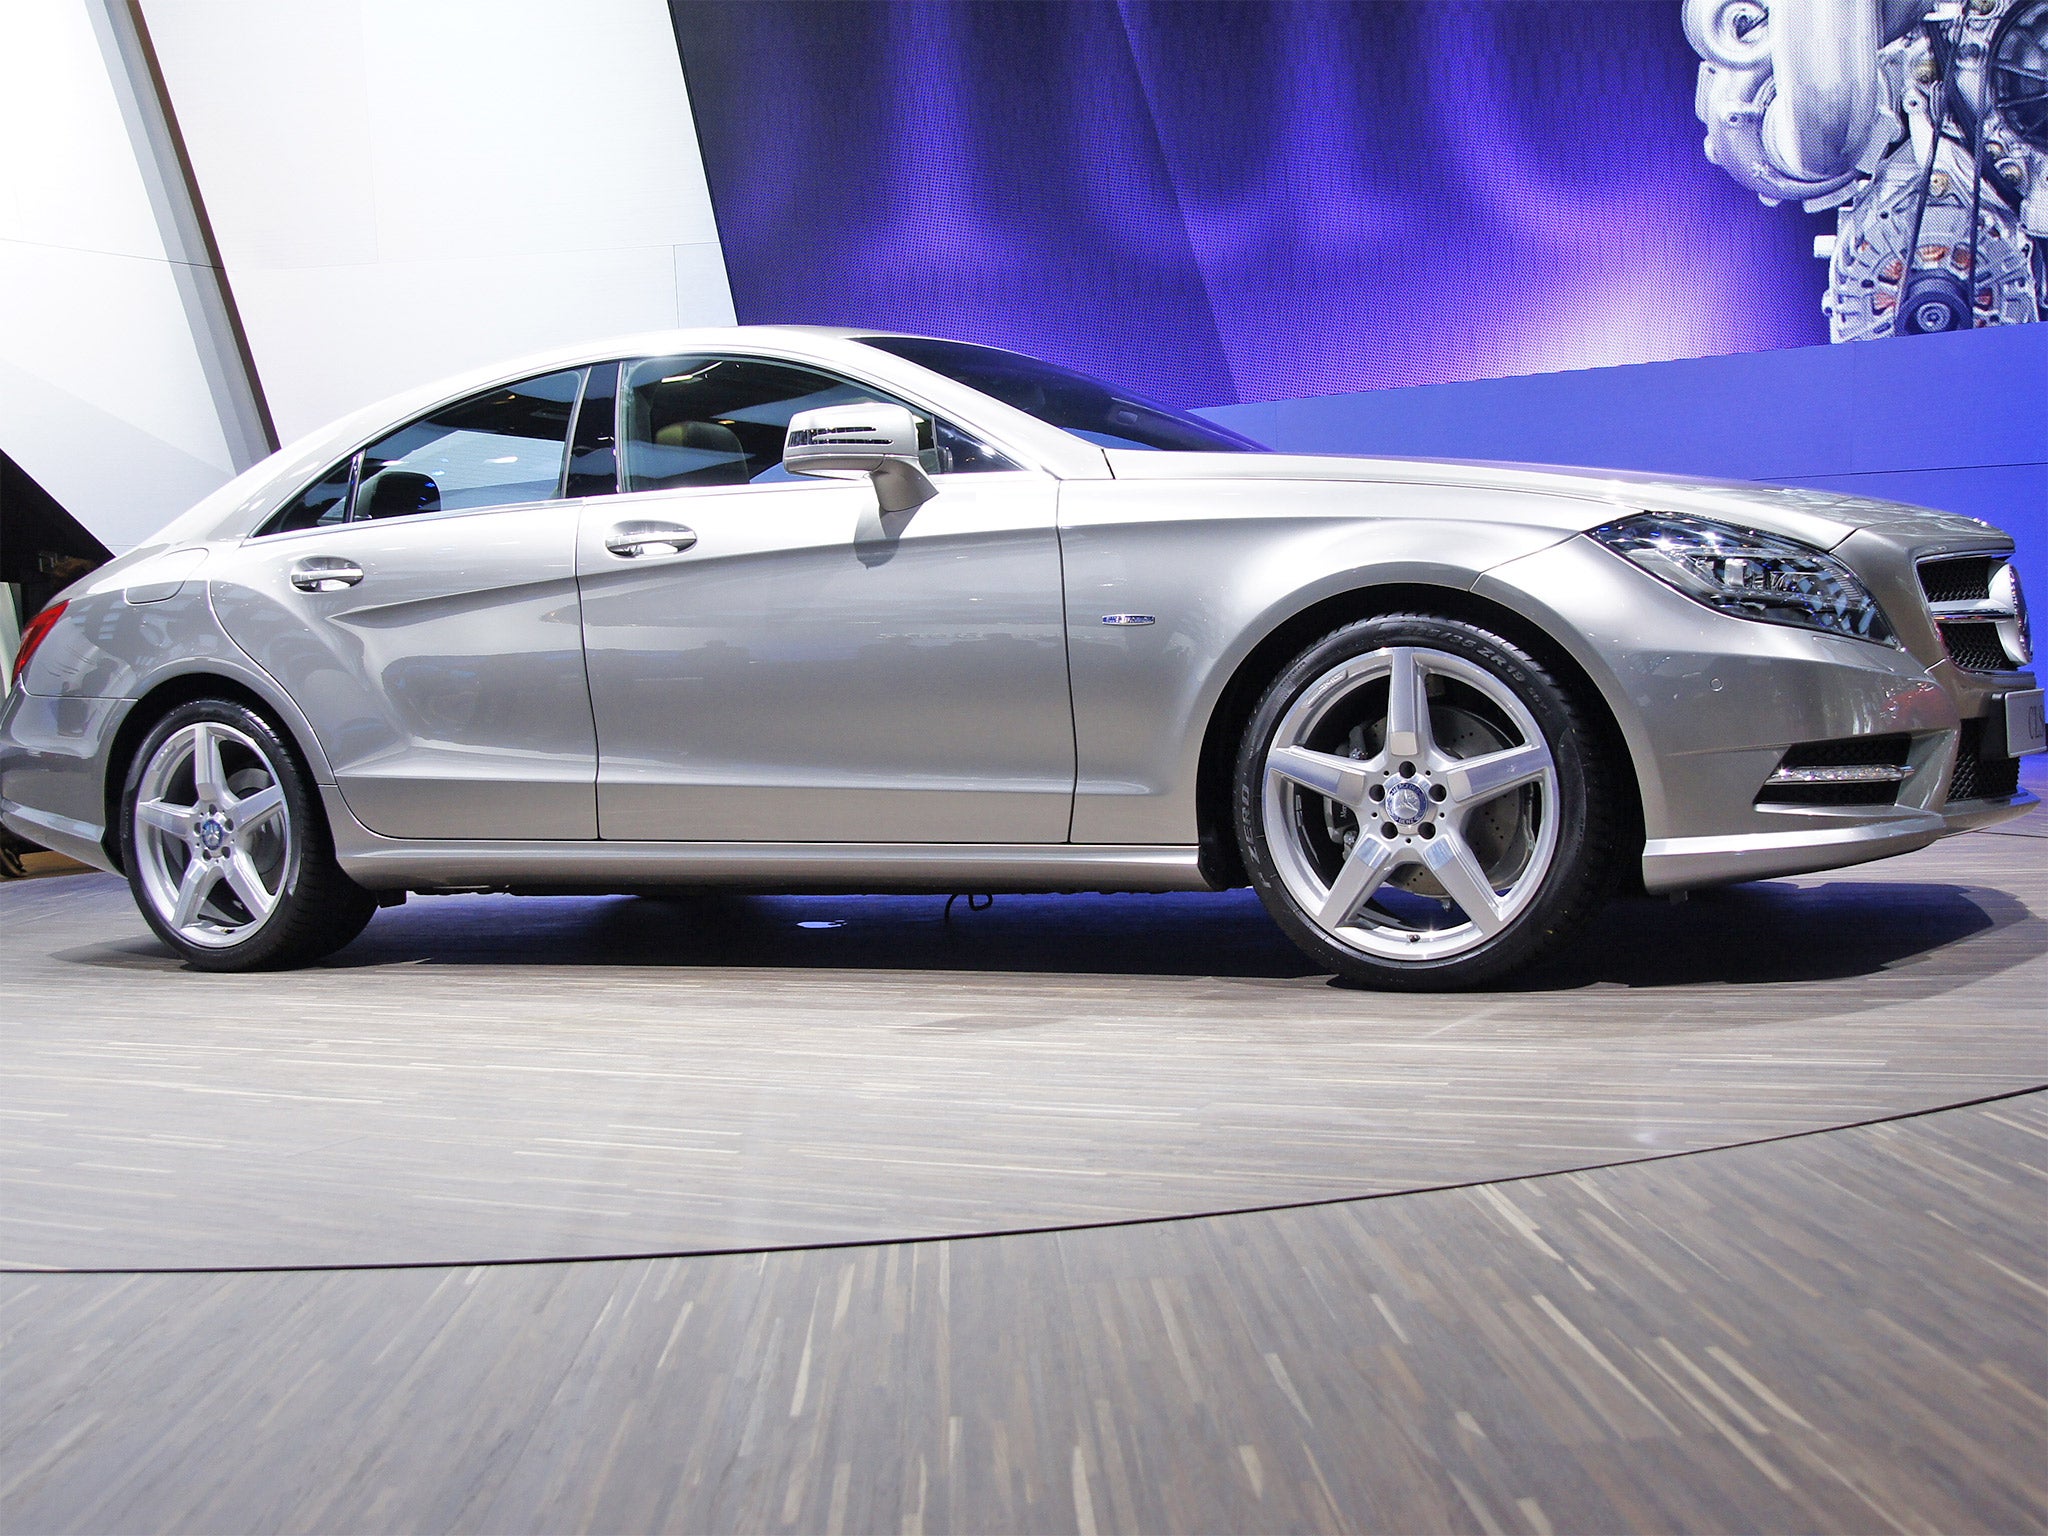 The Mercedes CLS 350 has been reborn with new engines and a nine-speed automatic gearbox